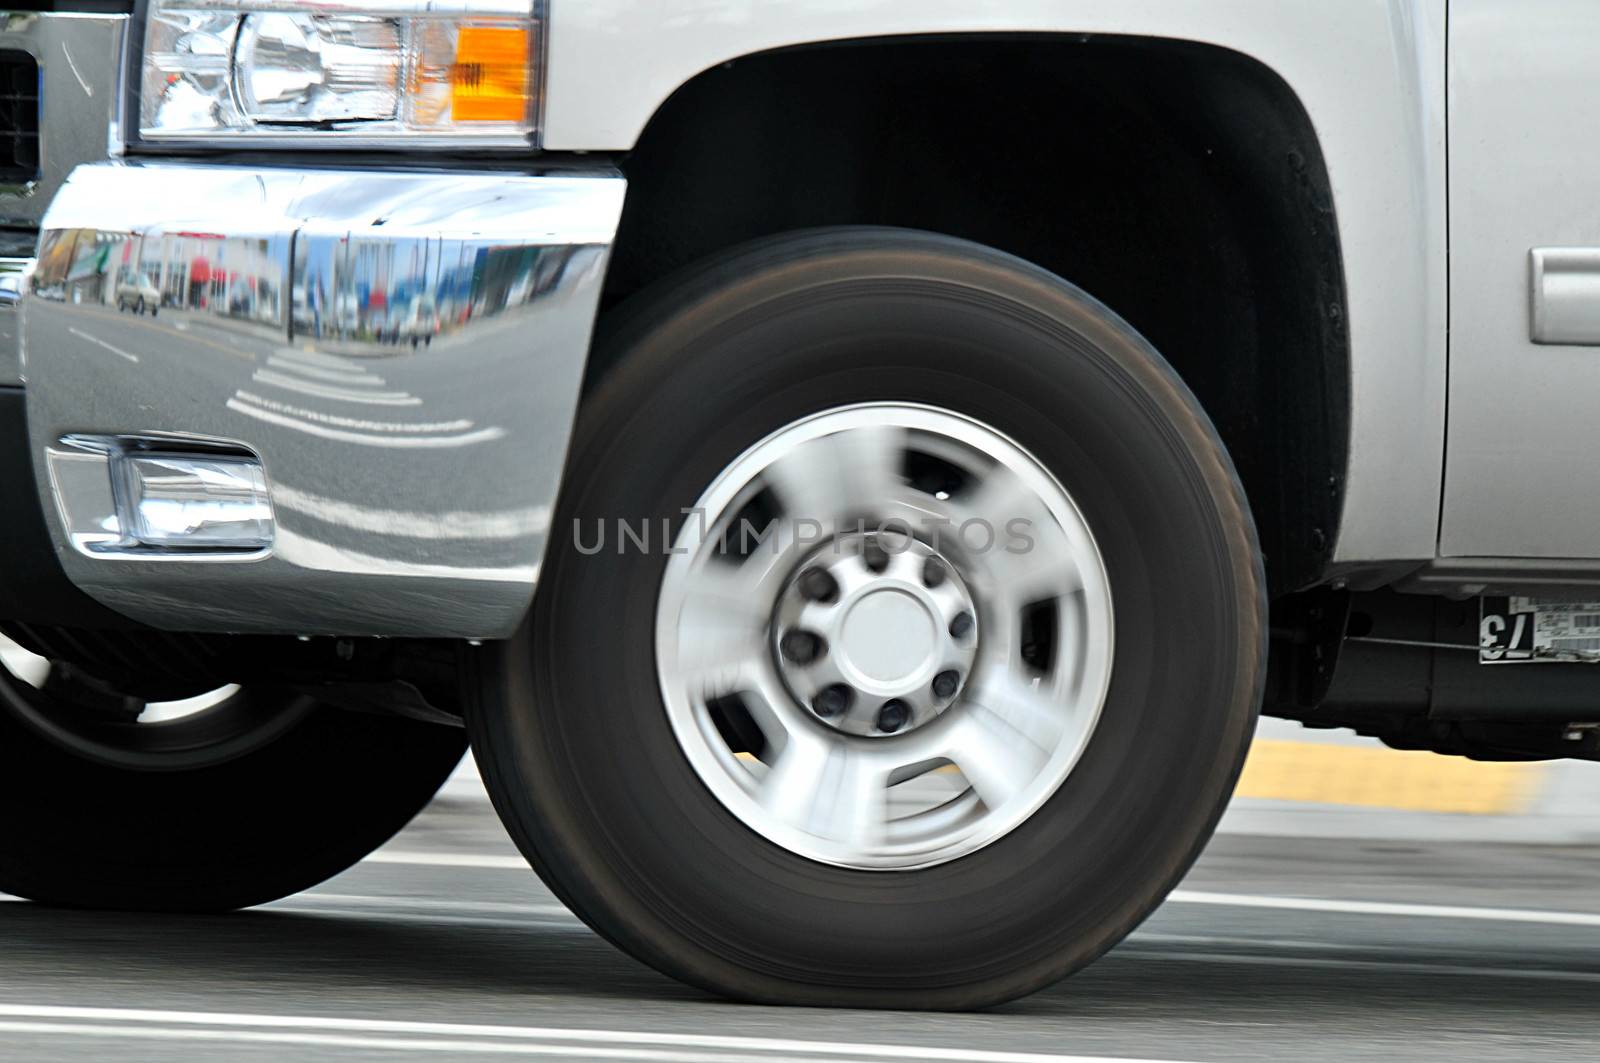 Wheel of automobile in motion.  Car moving, but in focus, street and whell blurred